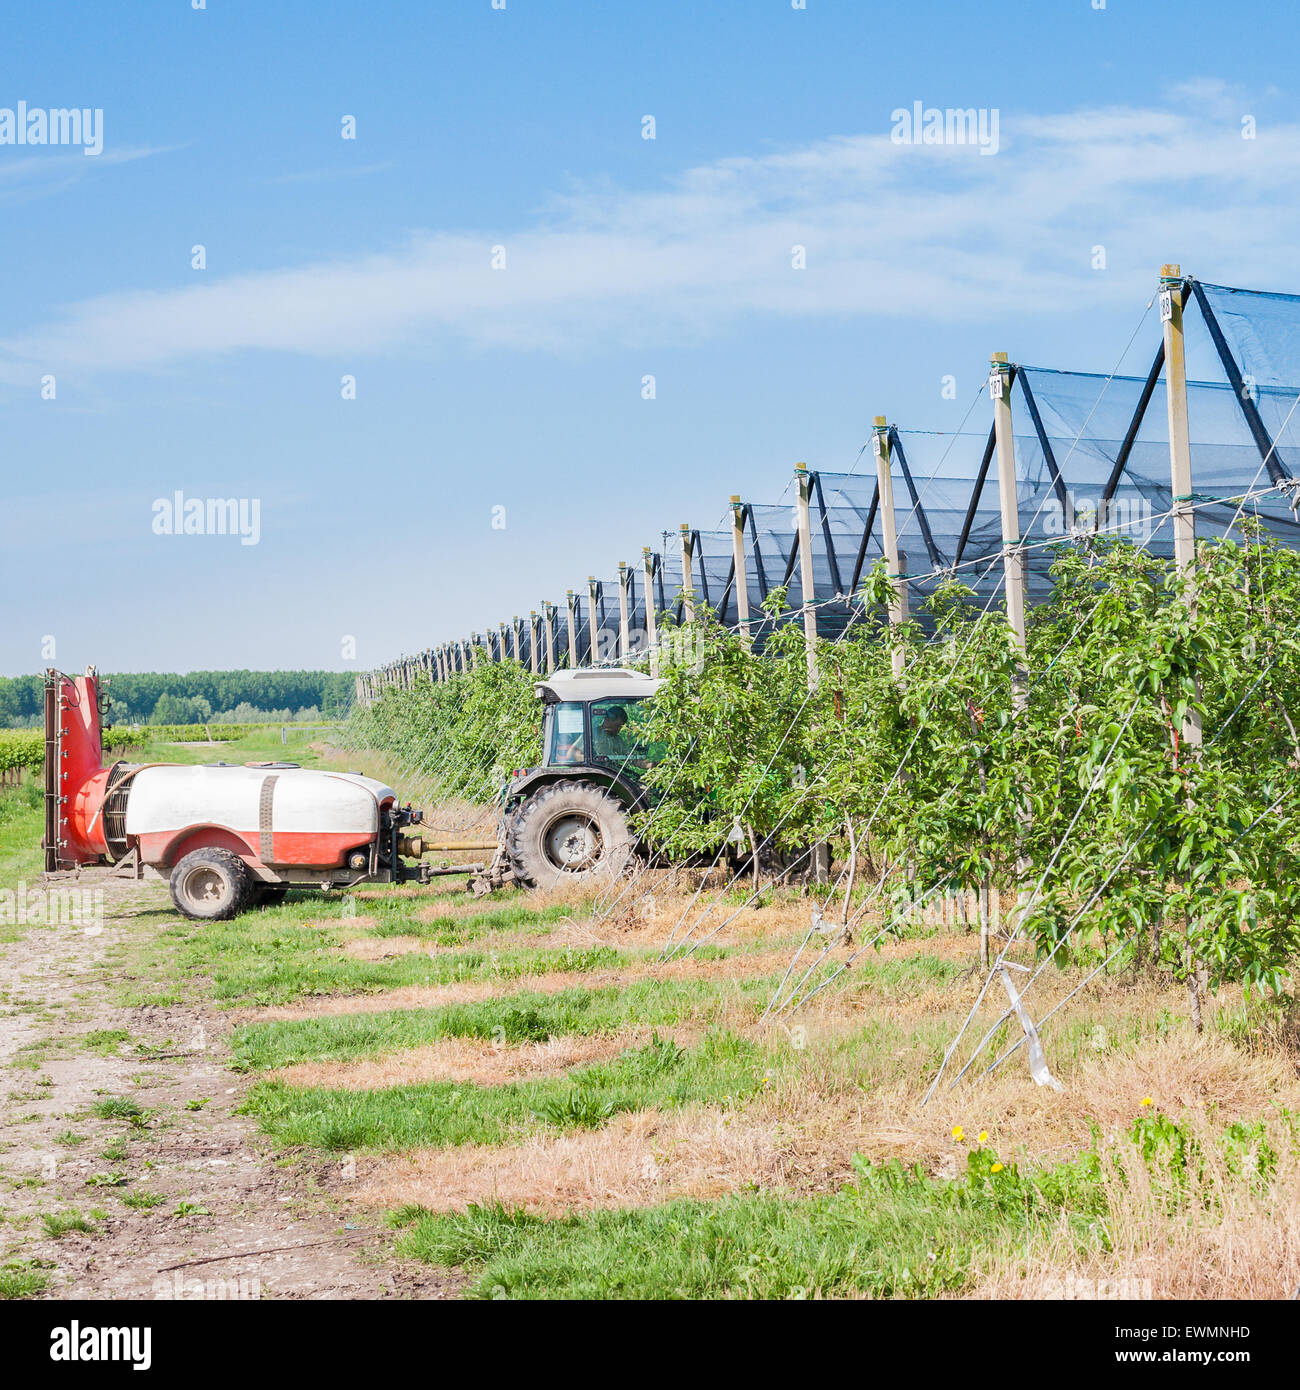 Agricultural work. Treatment pesticide to fruit trees Stock Photo